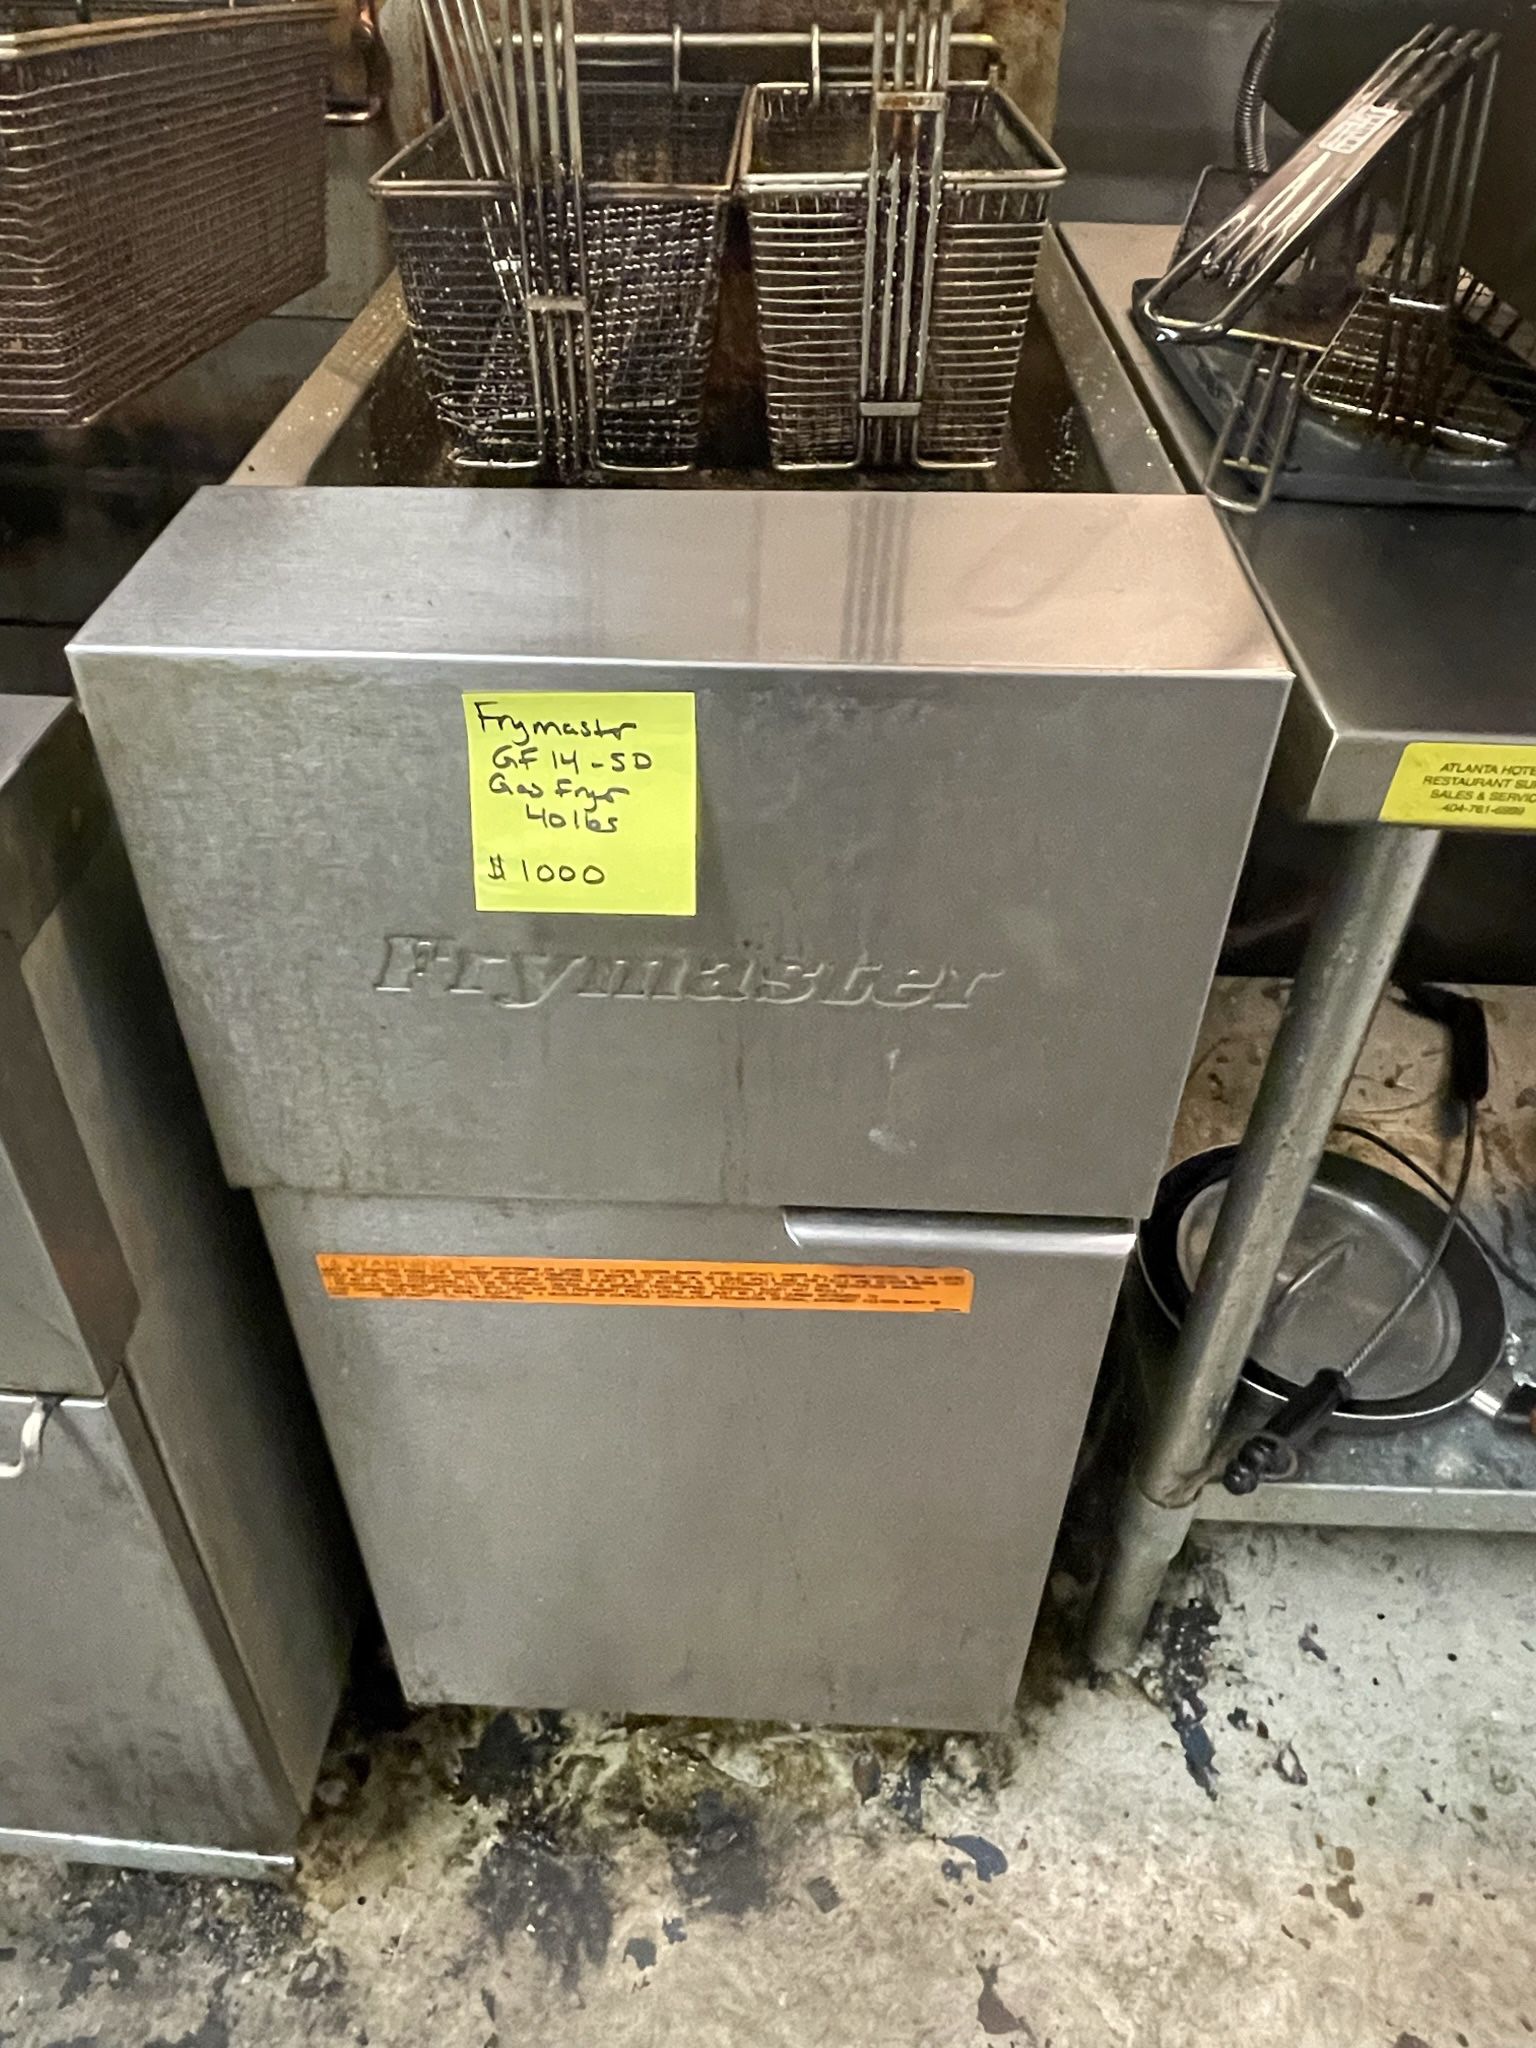 Restaurant Equipment - Fryers for Sale - 40lb and 75lb gas fryers